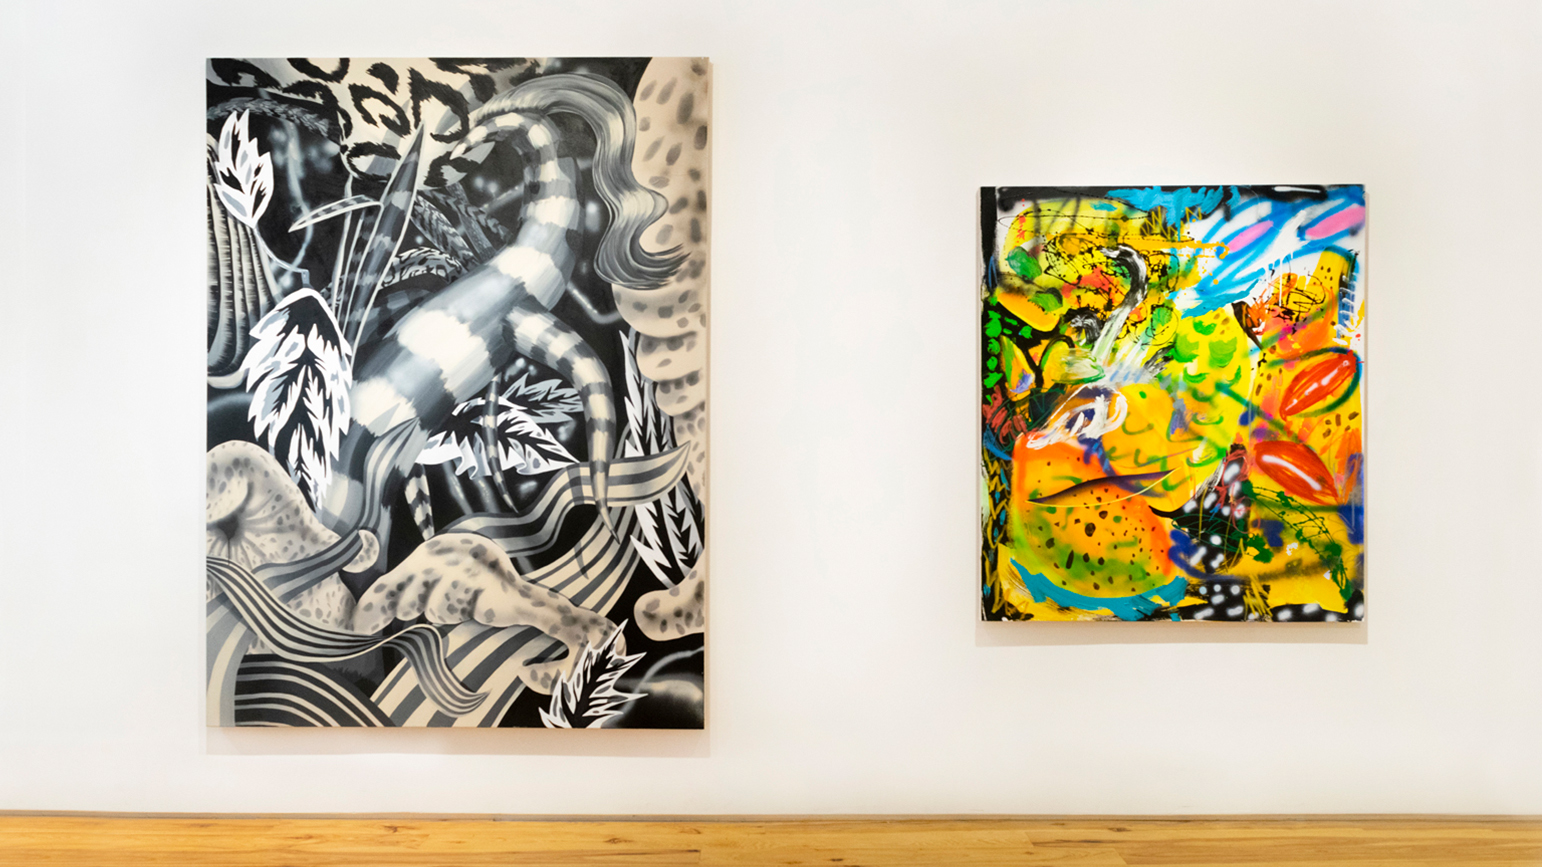 Professor Westbrook Opens Solo Show at Freight+Volume in NYC